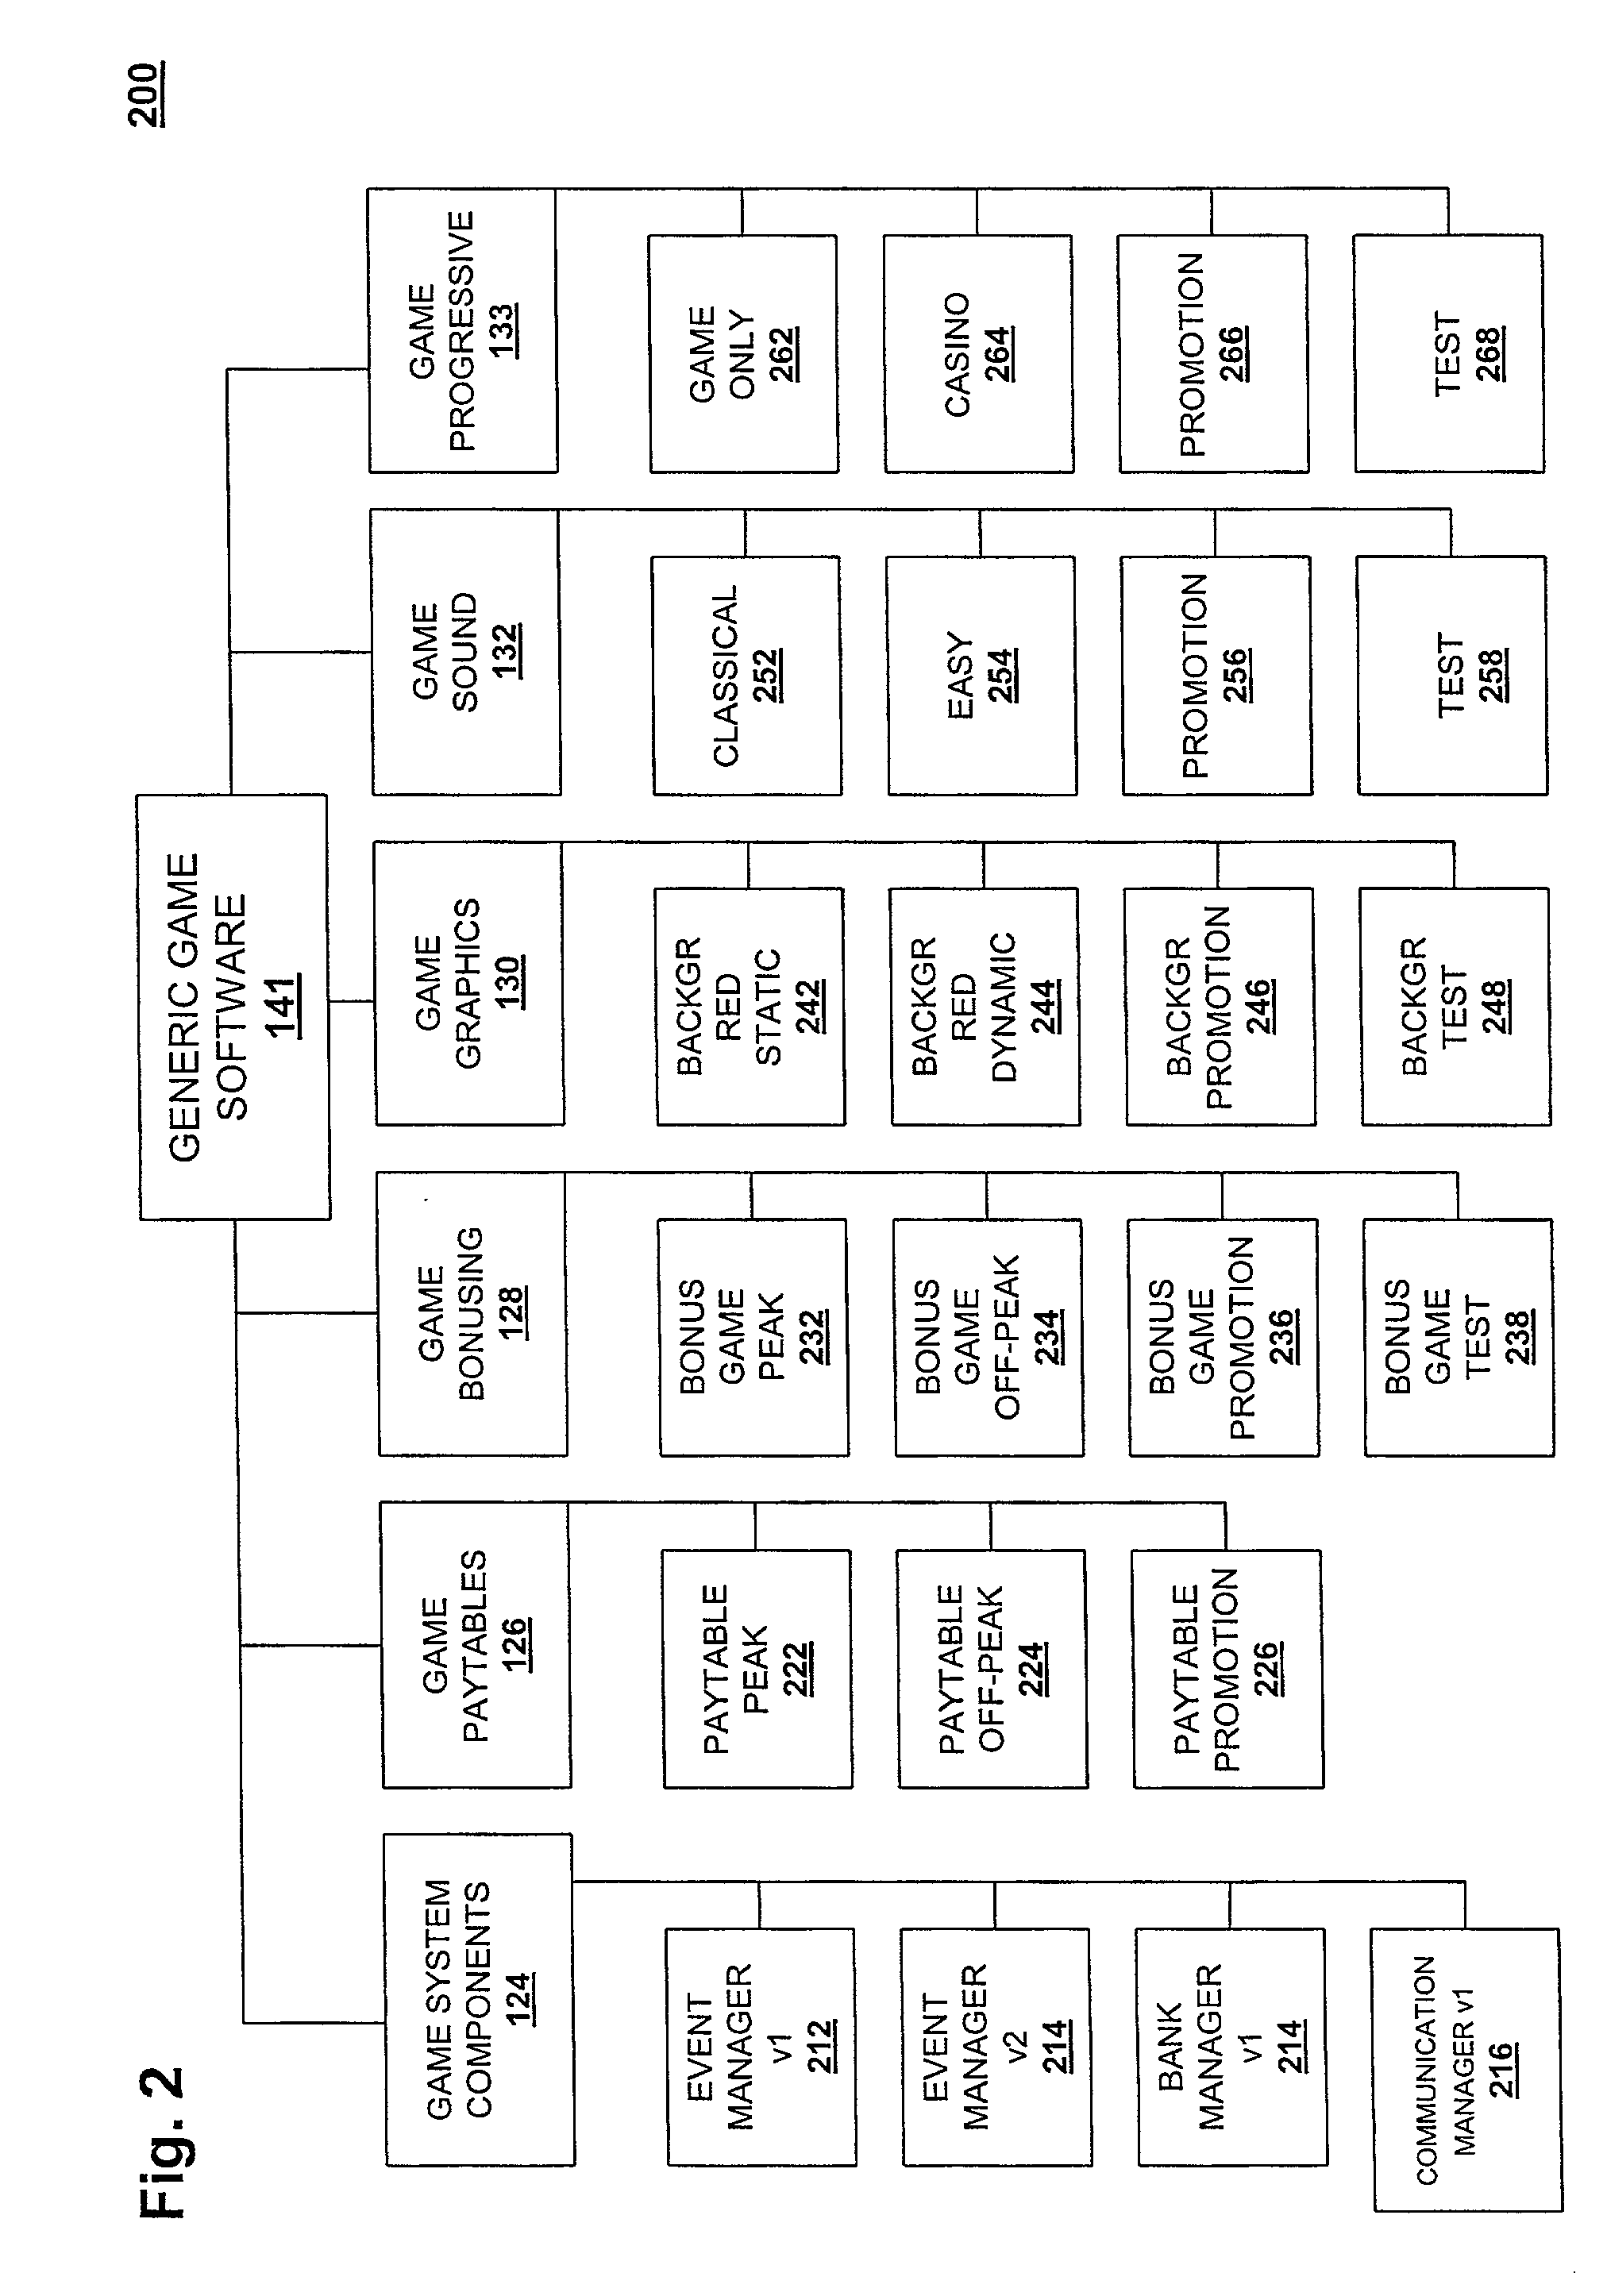 Wide area program distribution and game information communication system